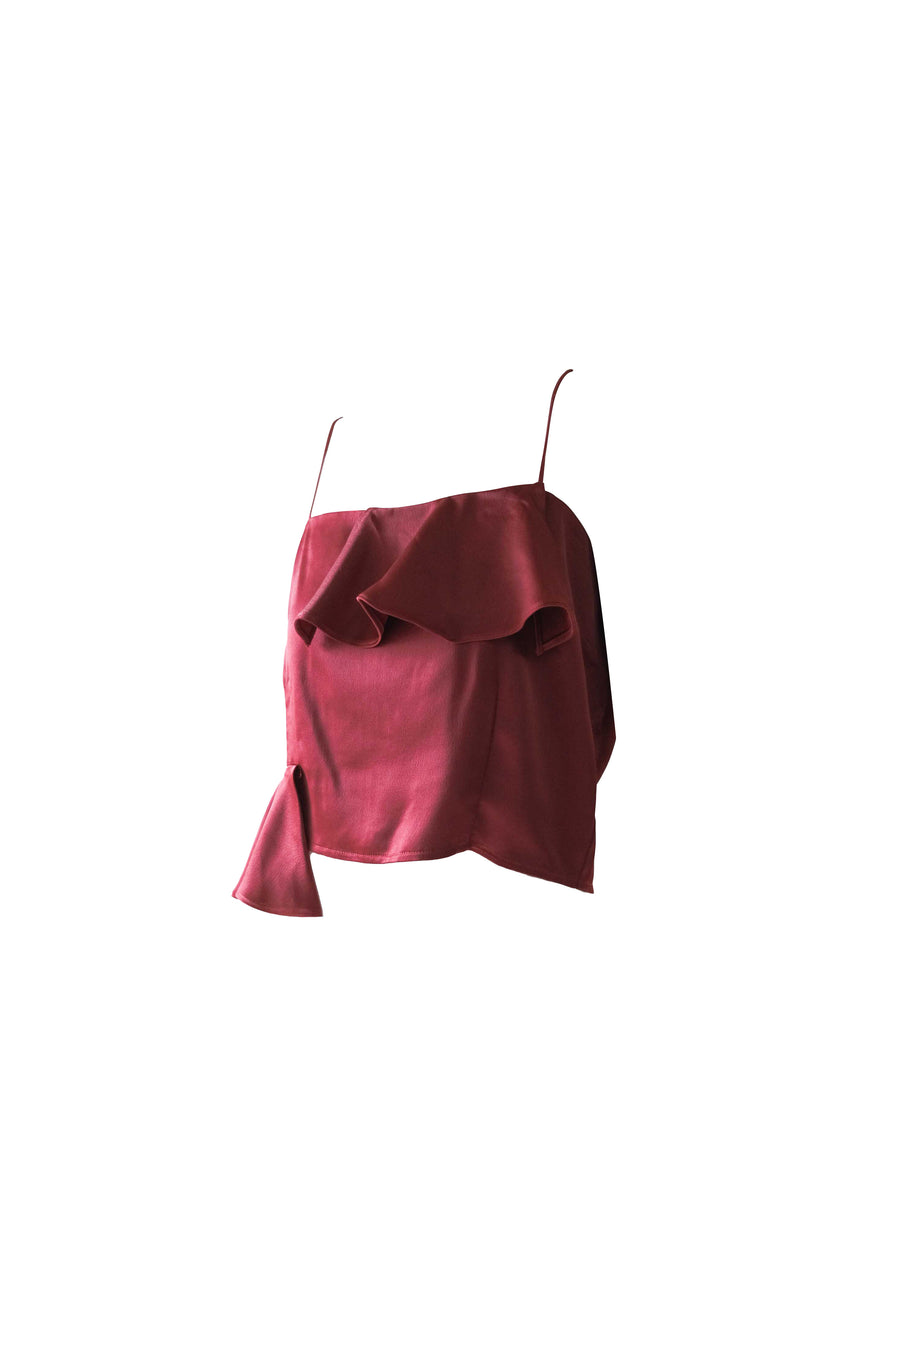 Cropped Top 05 - Maroon